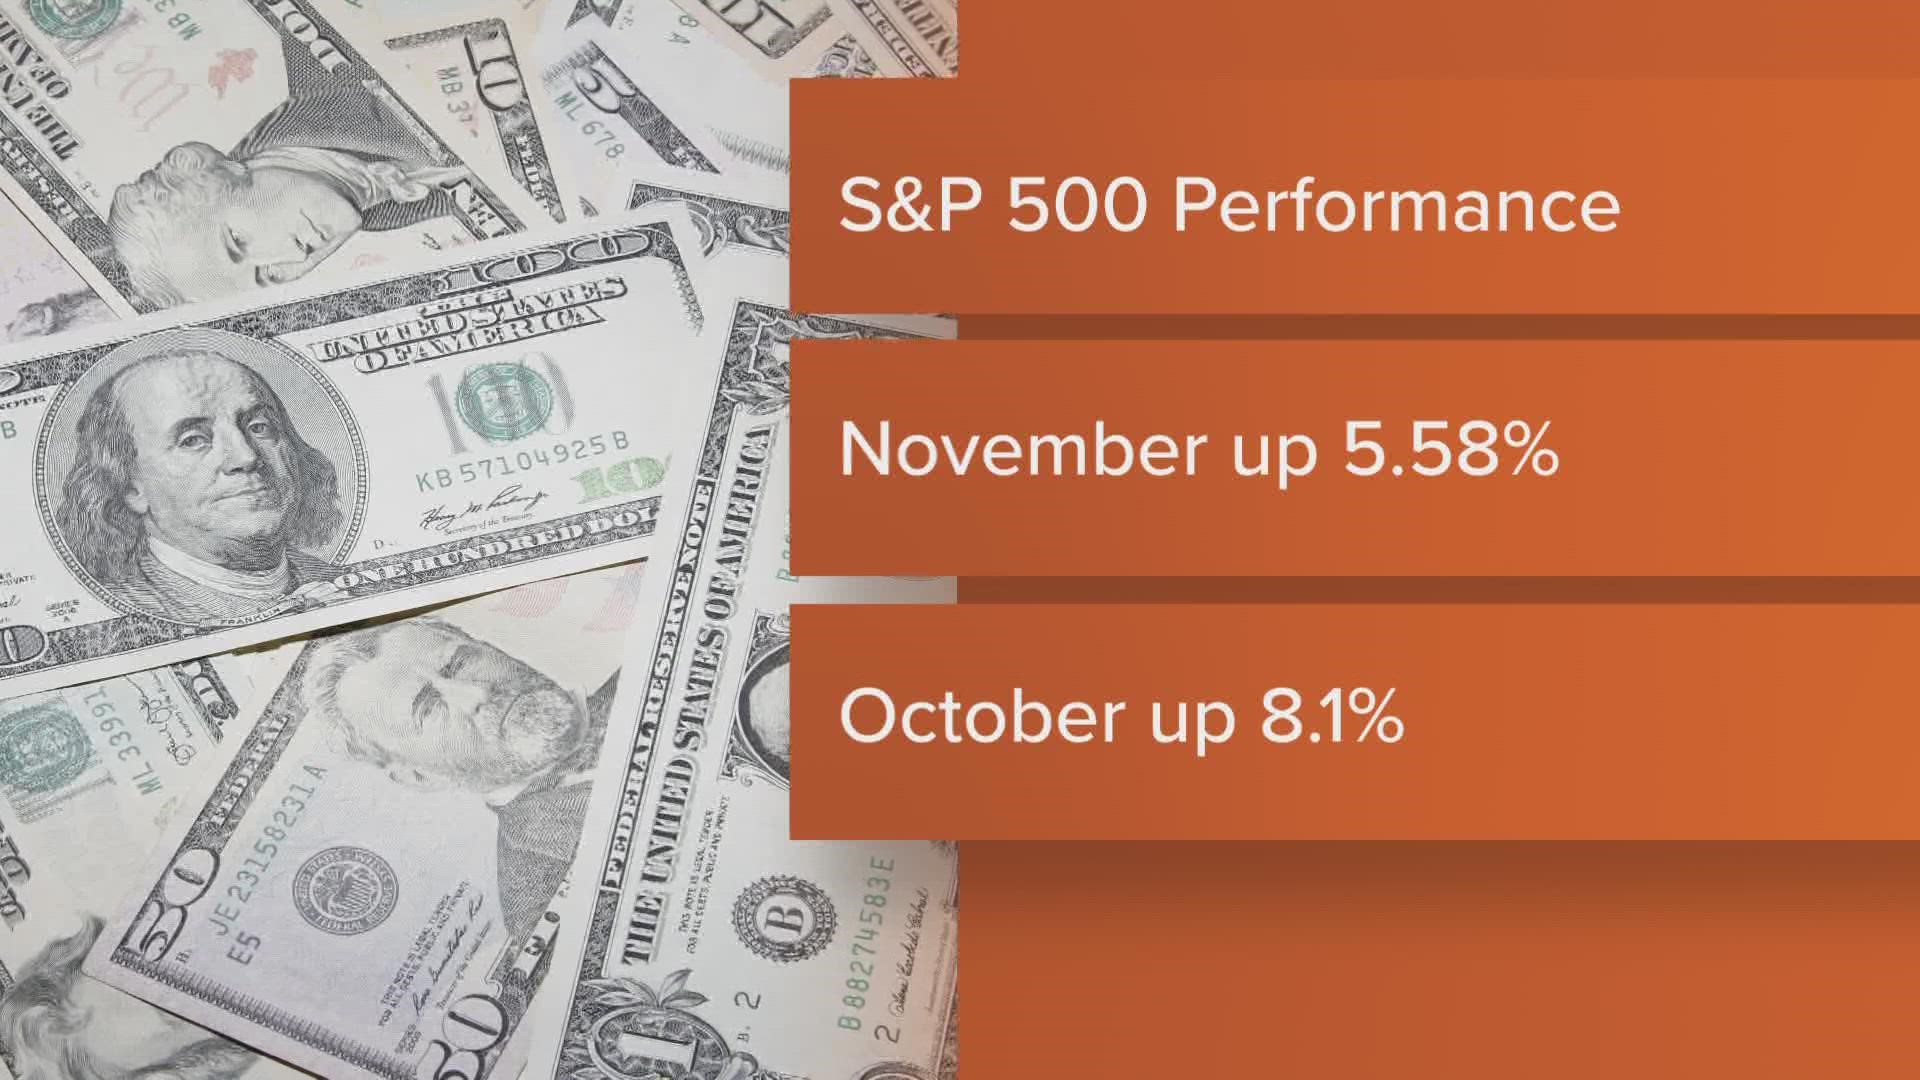 When it comes to the markets, stock futures were up slightly Thursday morning on top of a rally to end the month of November.